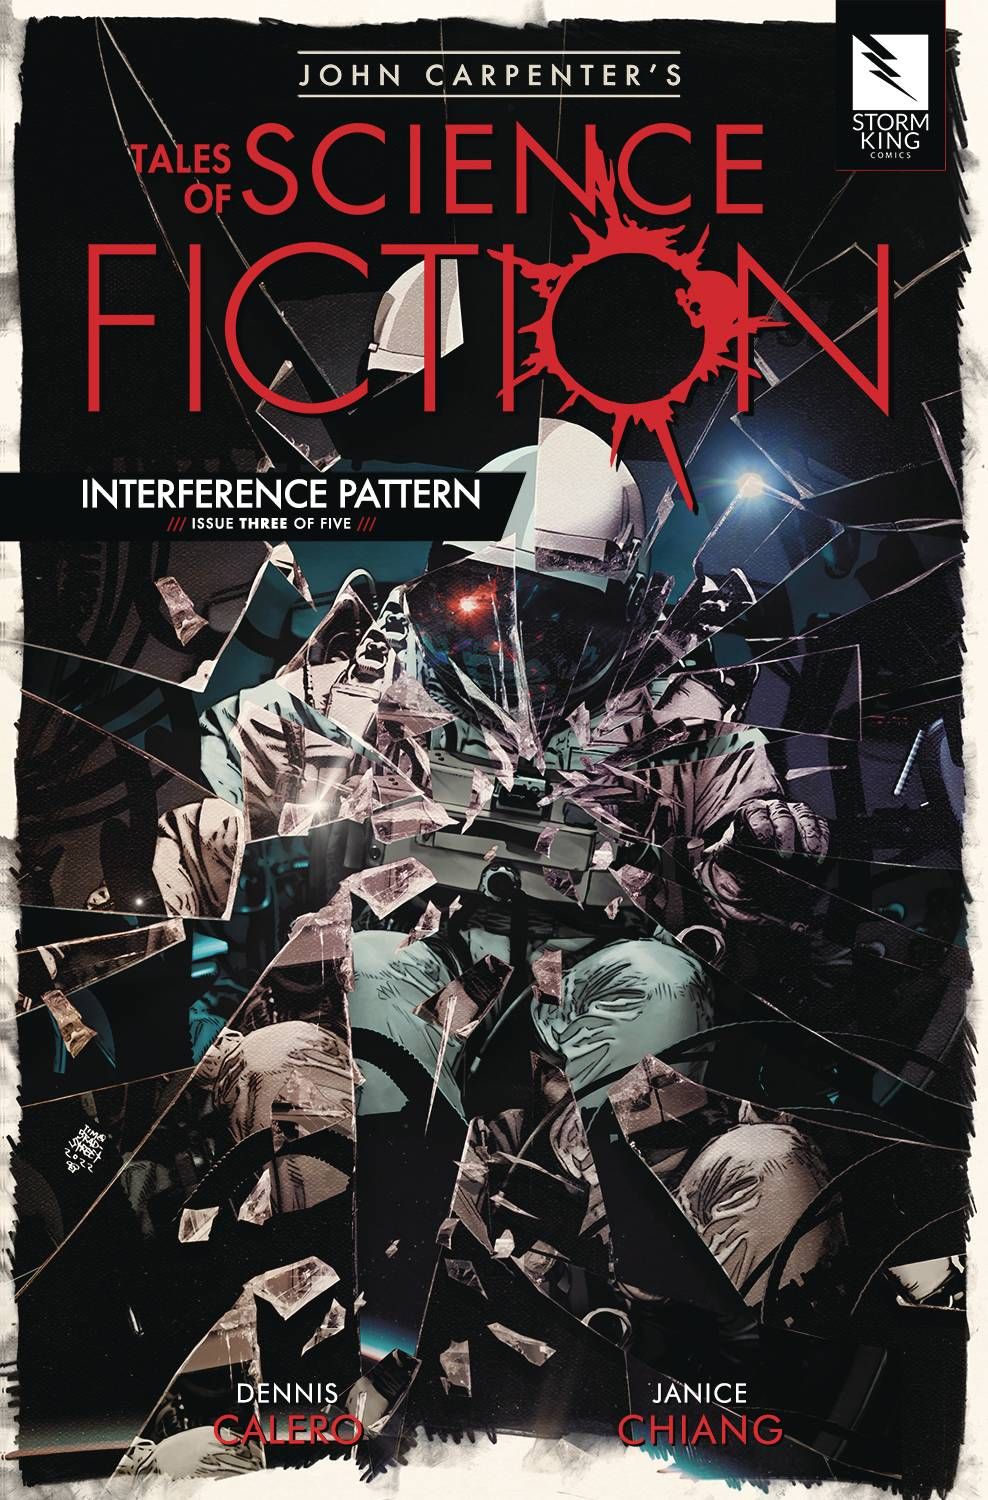 John Carpenter's Tales of Science-Fiction: Interference Pattern #3 Comic